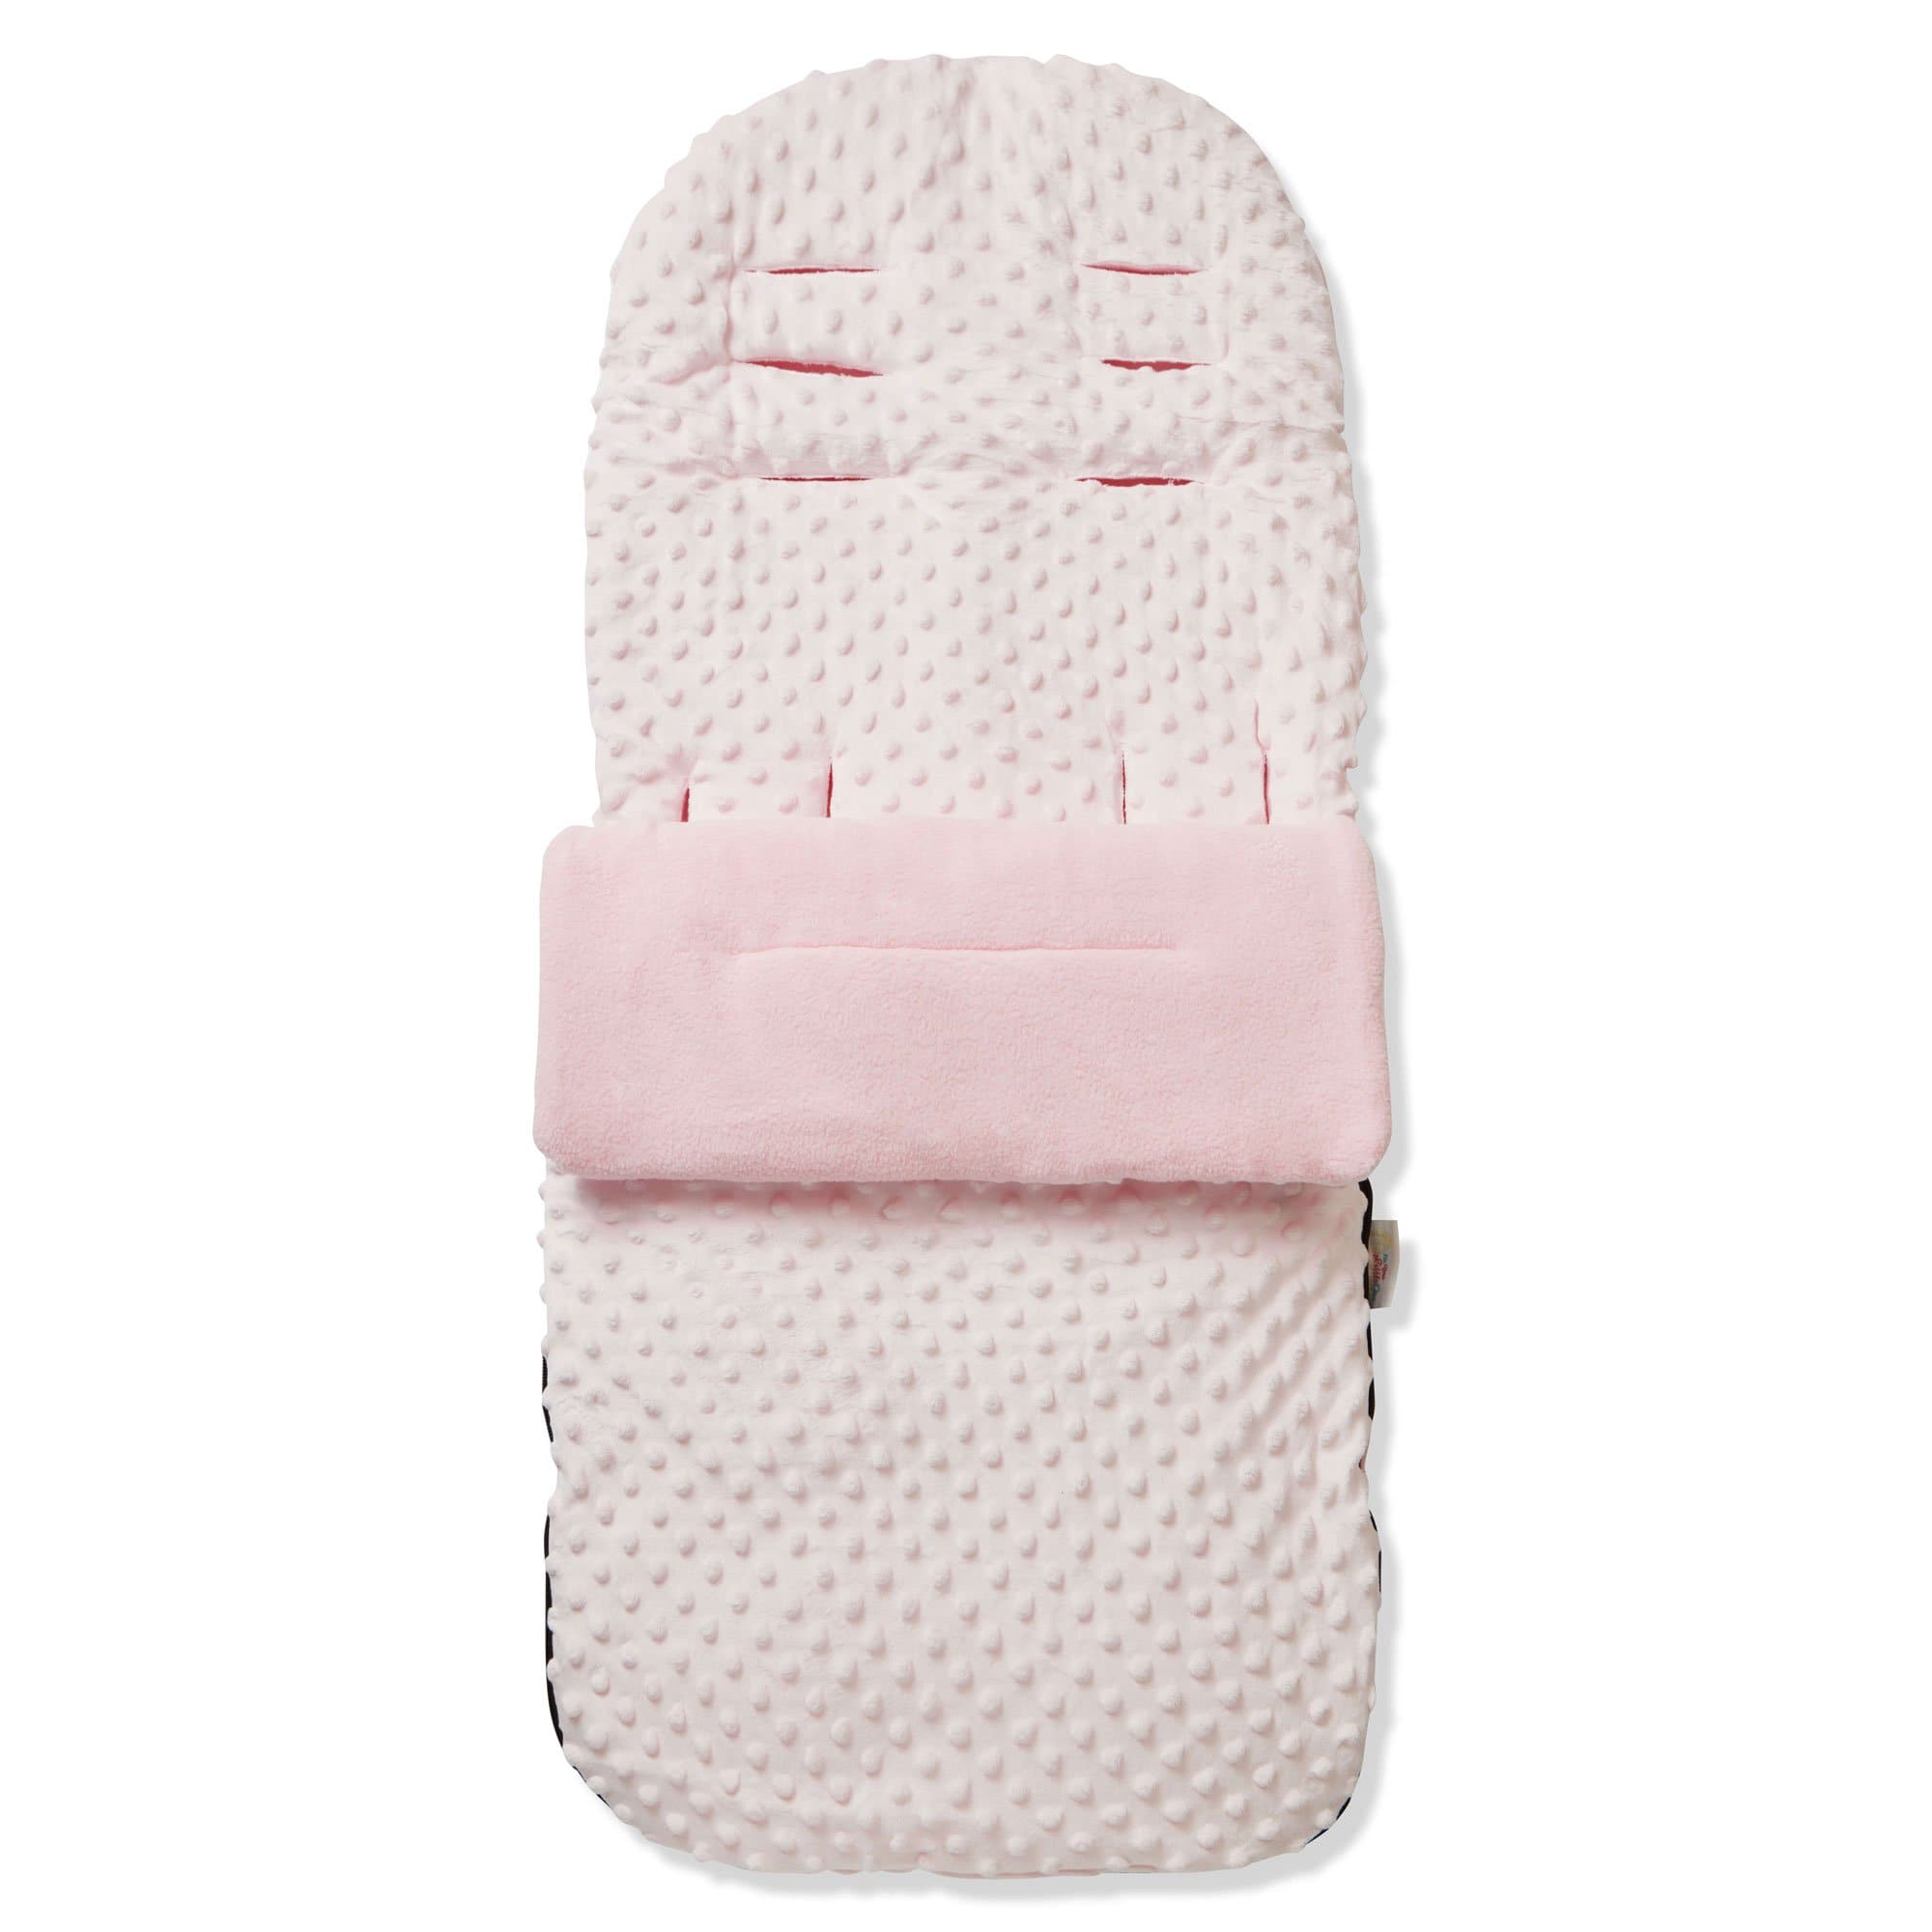 Dimple Footmuff / Cosy Toes Compatible with Red Castle - For Your Little One